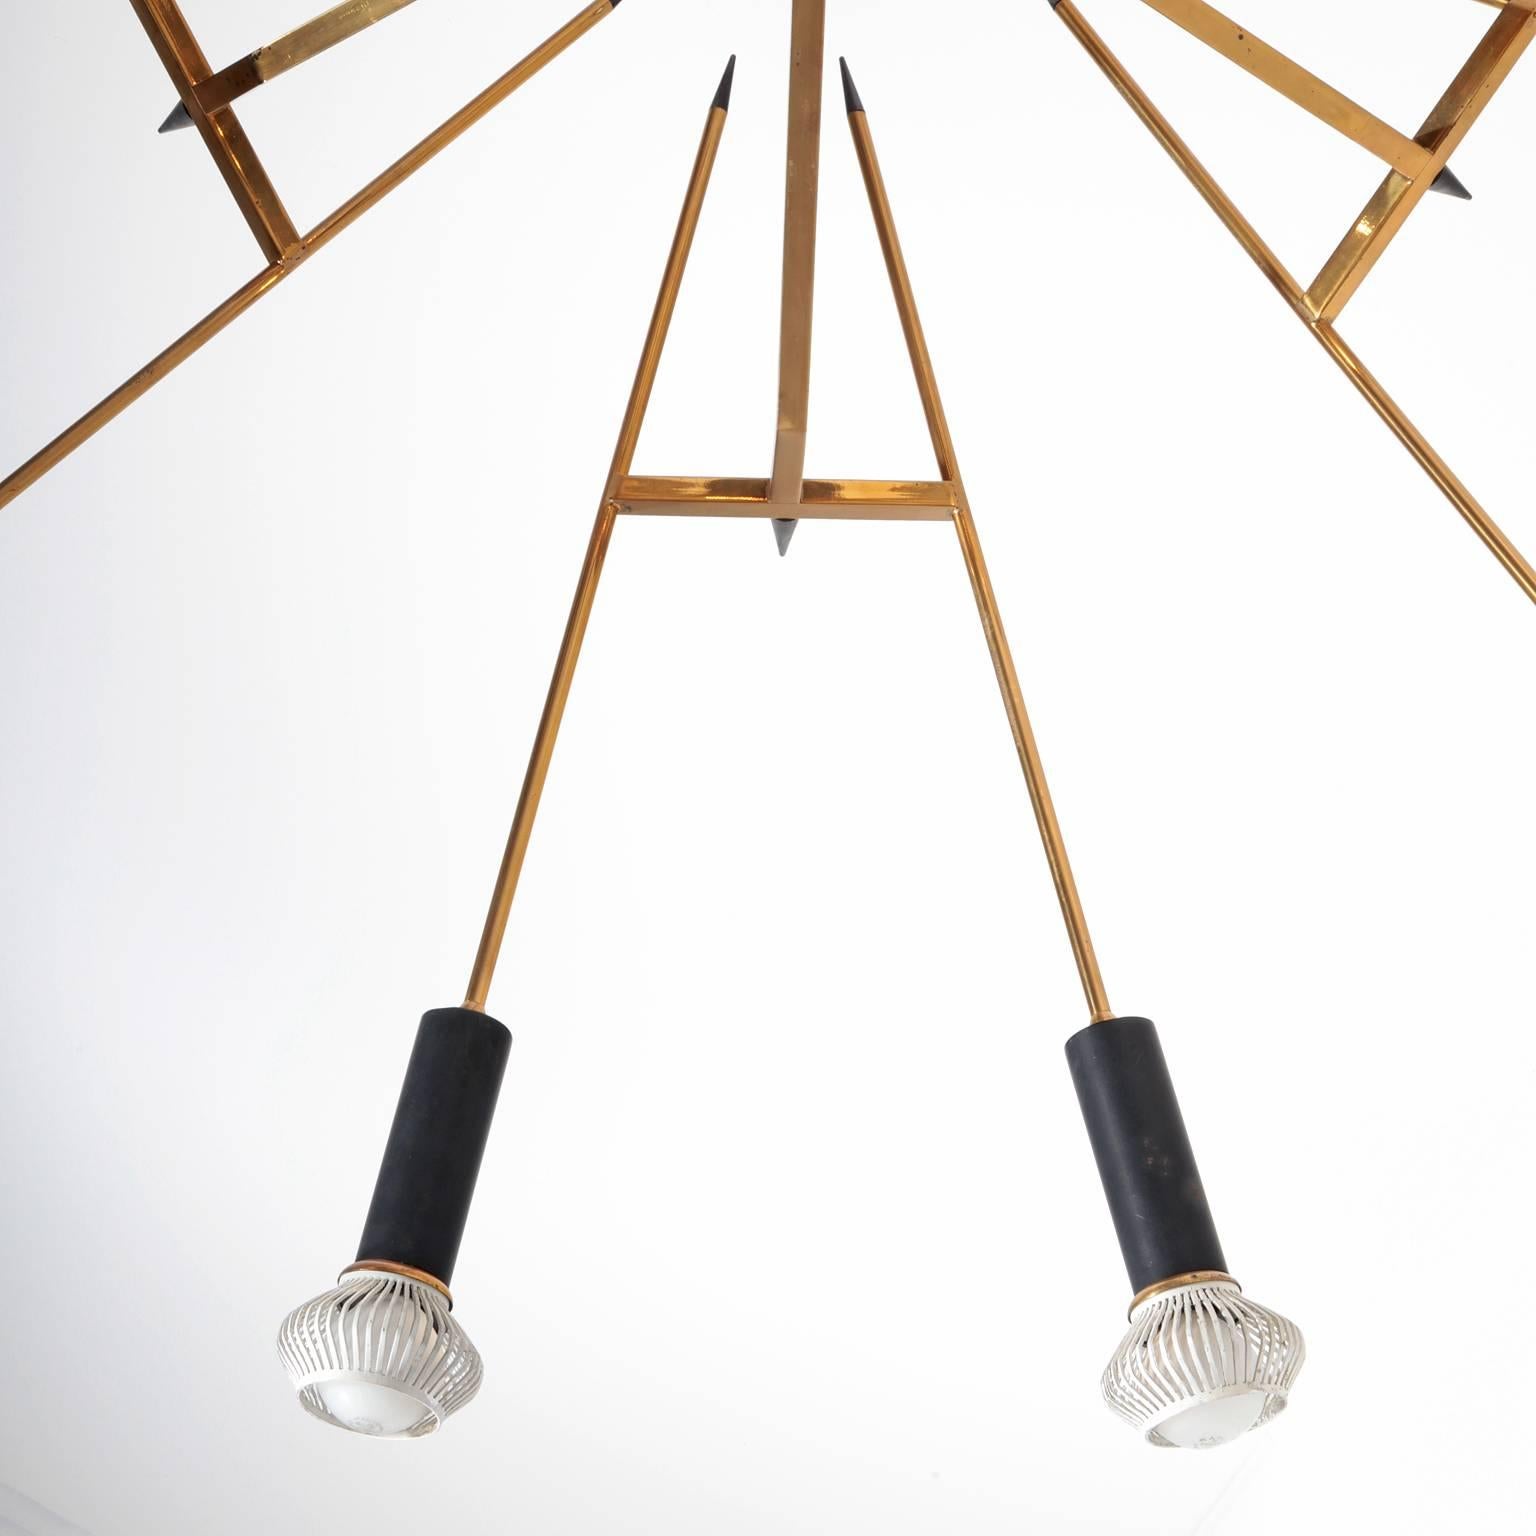 Chandelier by Oscar Torlasco for Lumi with 12 flames. The brass frame consists of 12 arrow-shaped staffs with black spikes and a black cylindrical sockets.